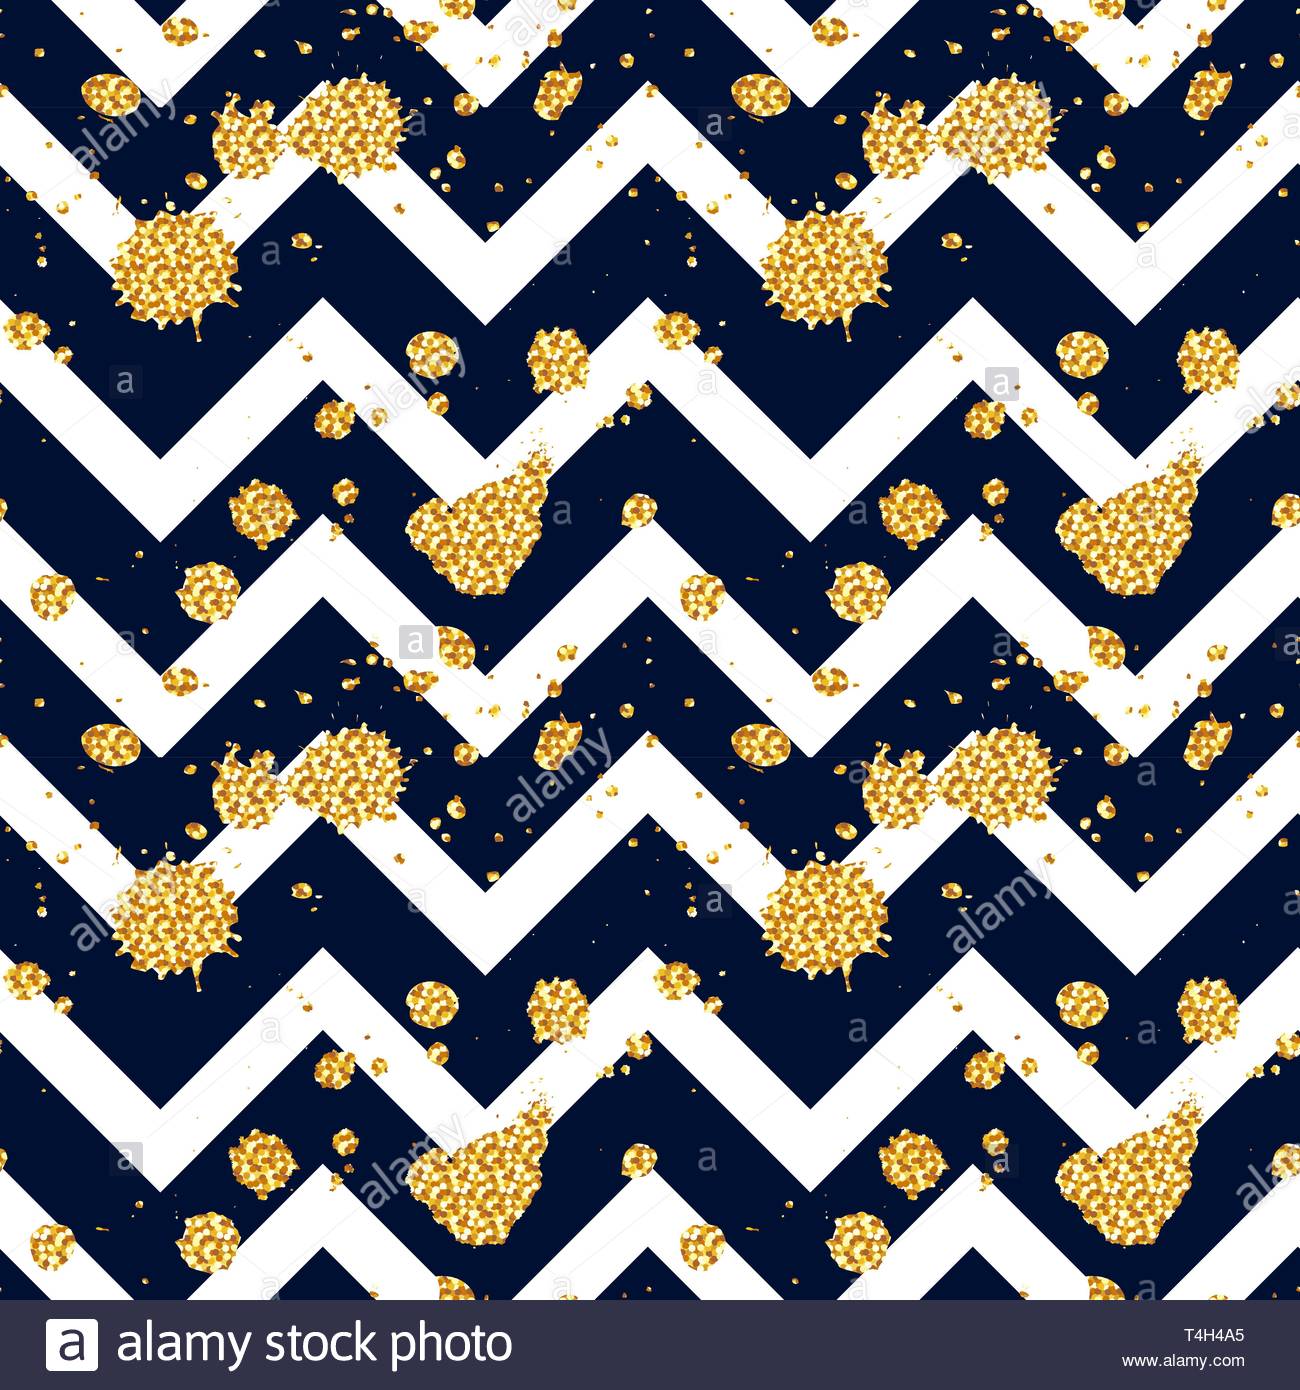 Seamless Pattern With Glittering Splashes And Stains On Chevron